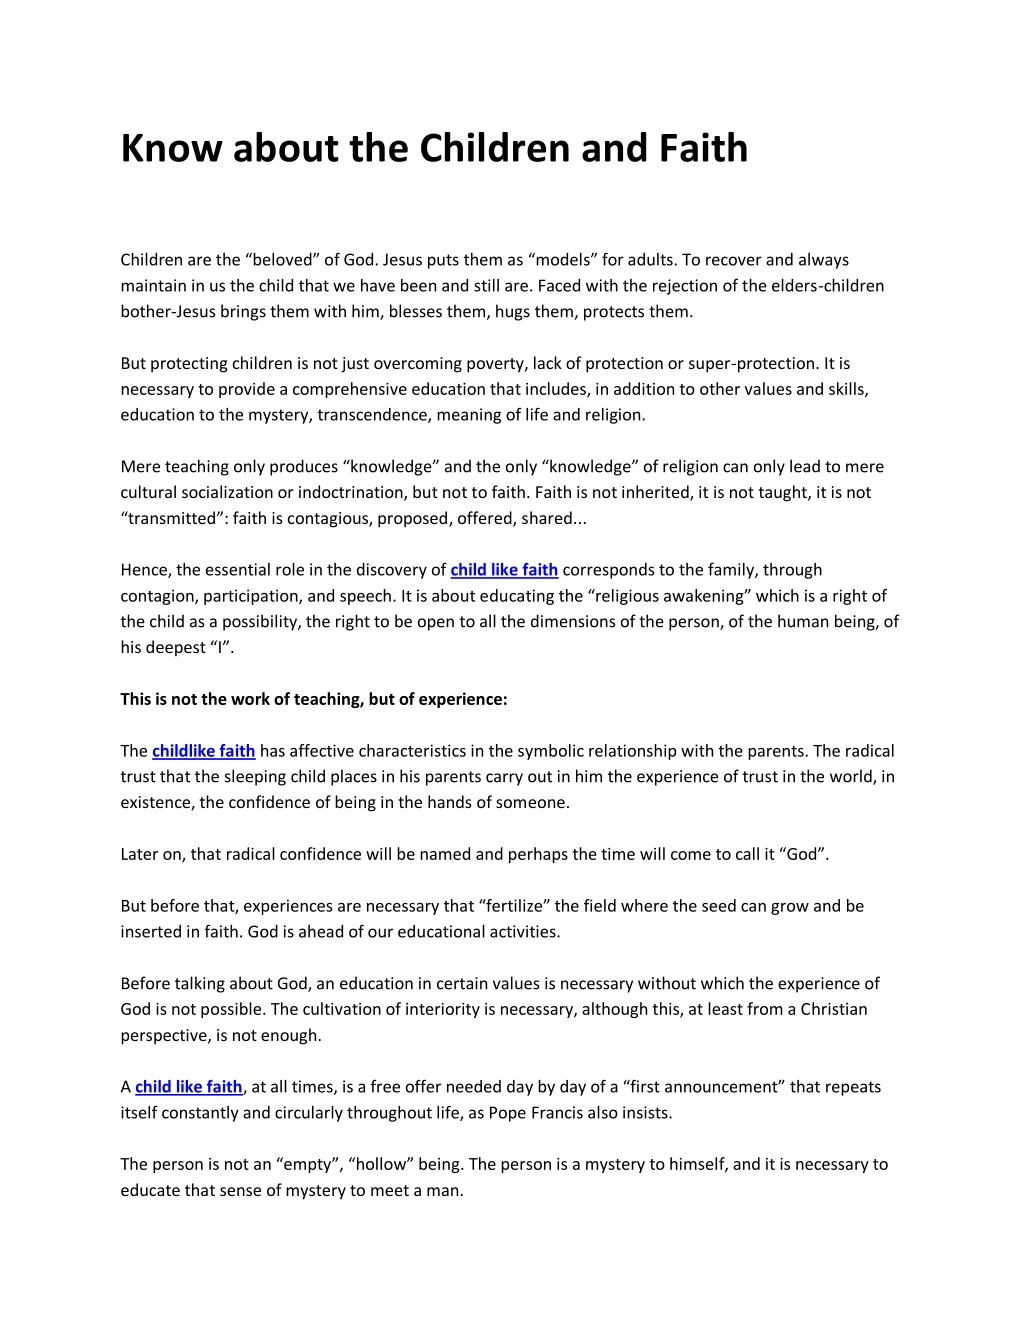 know about the children and faith